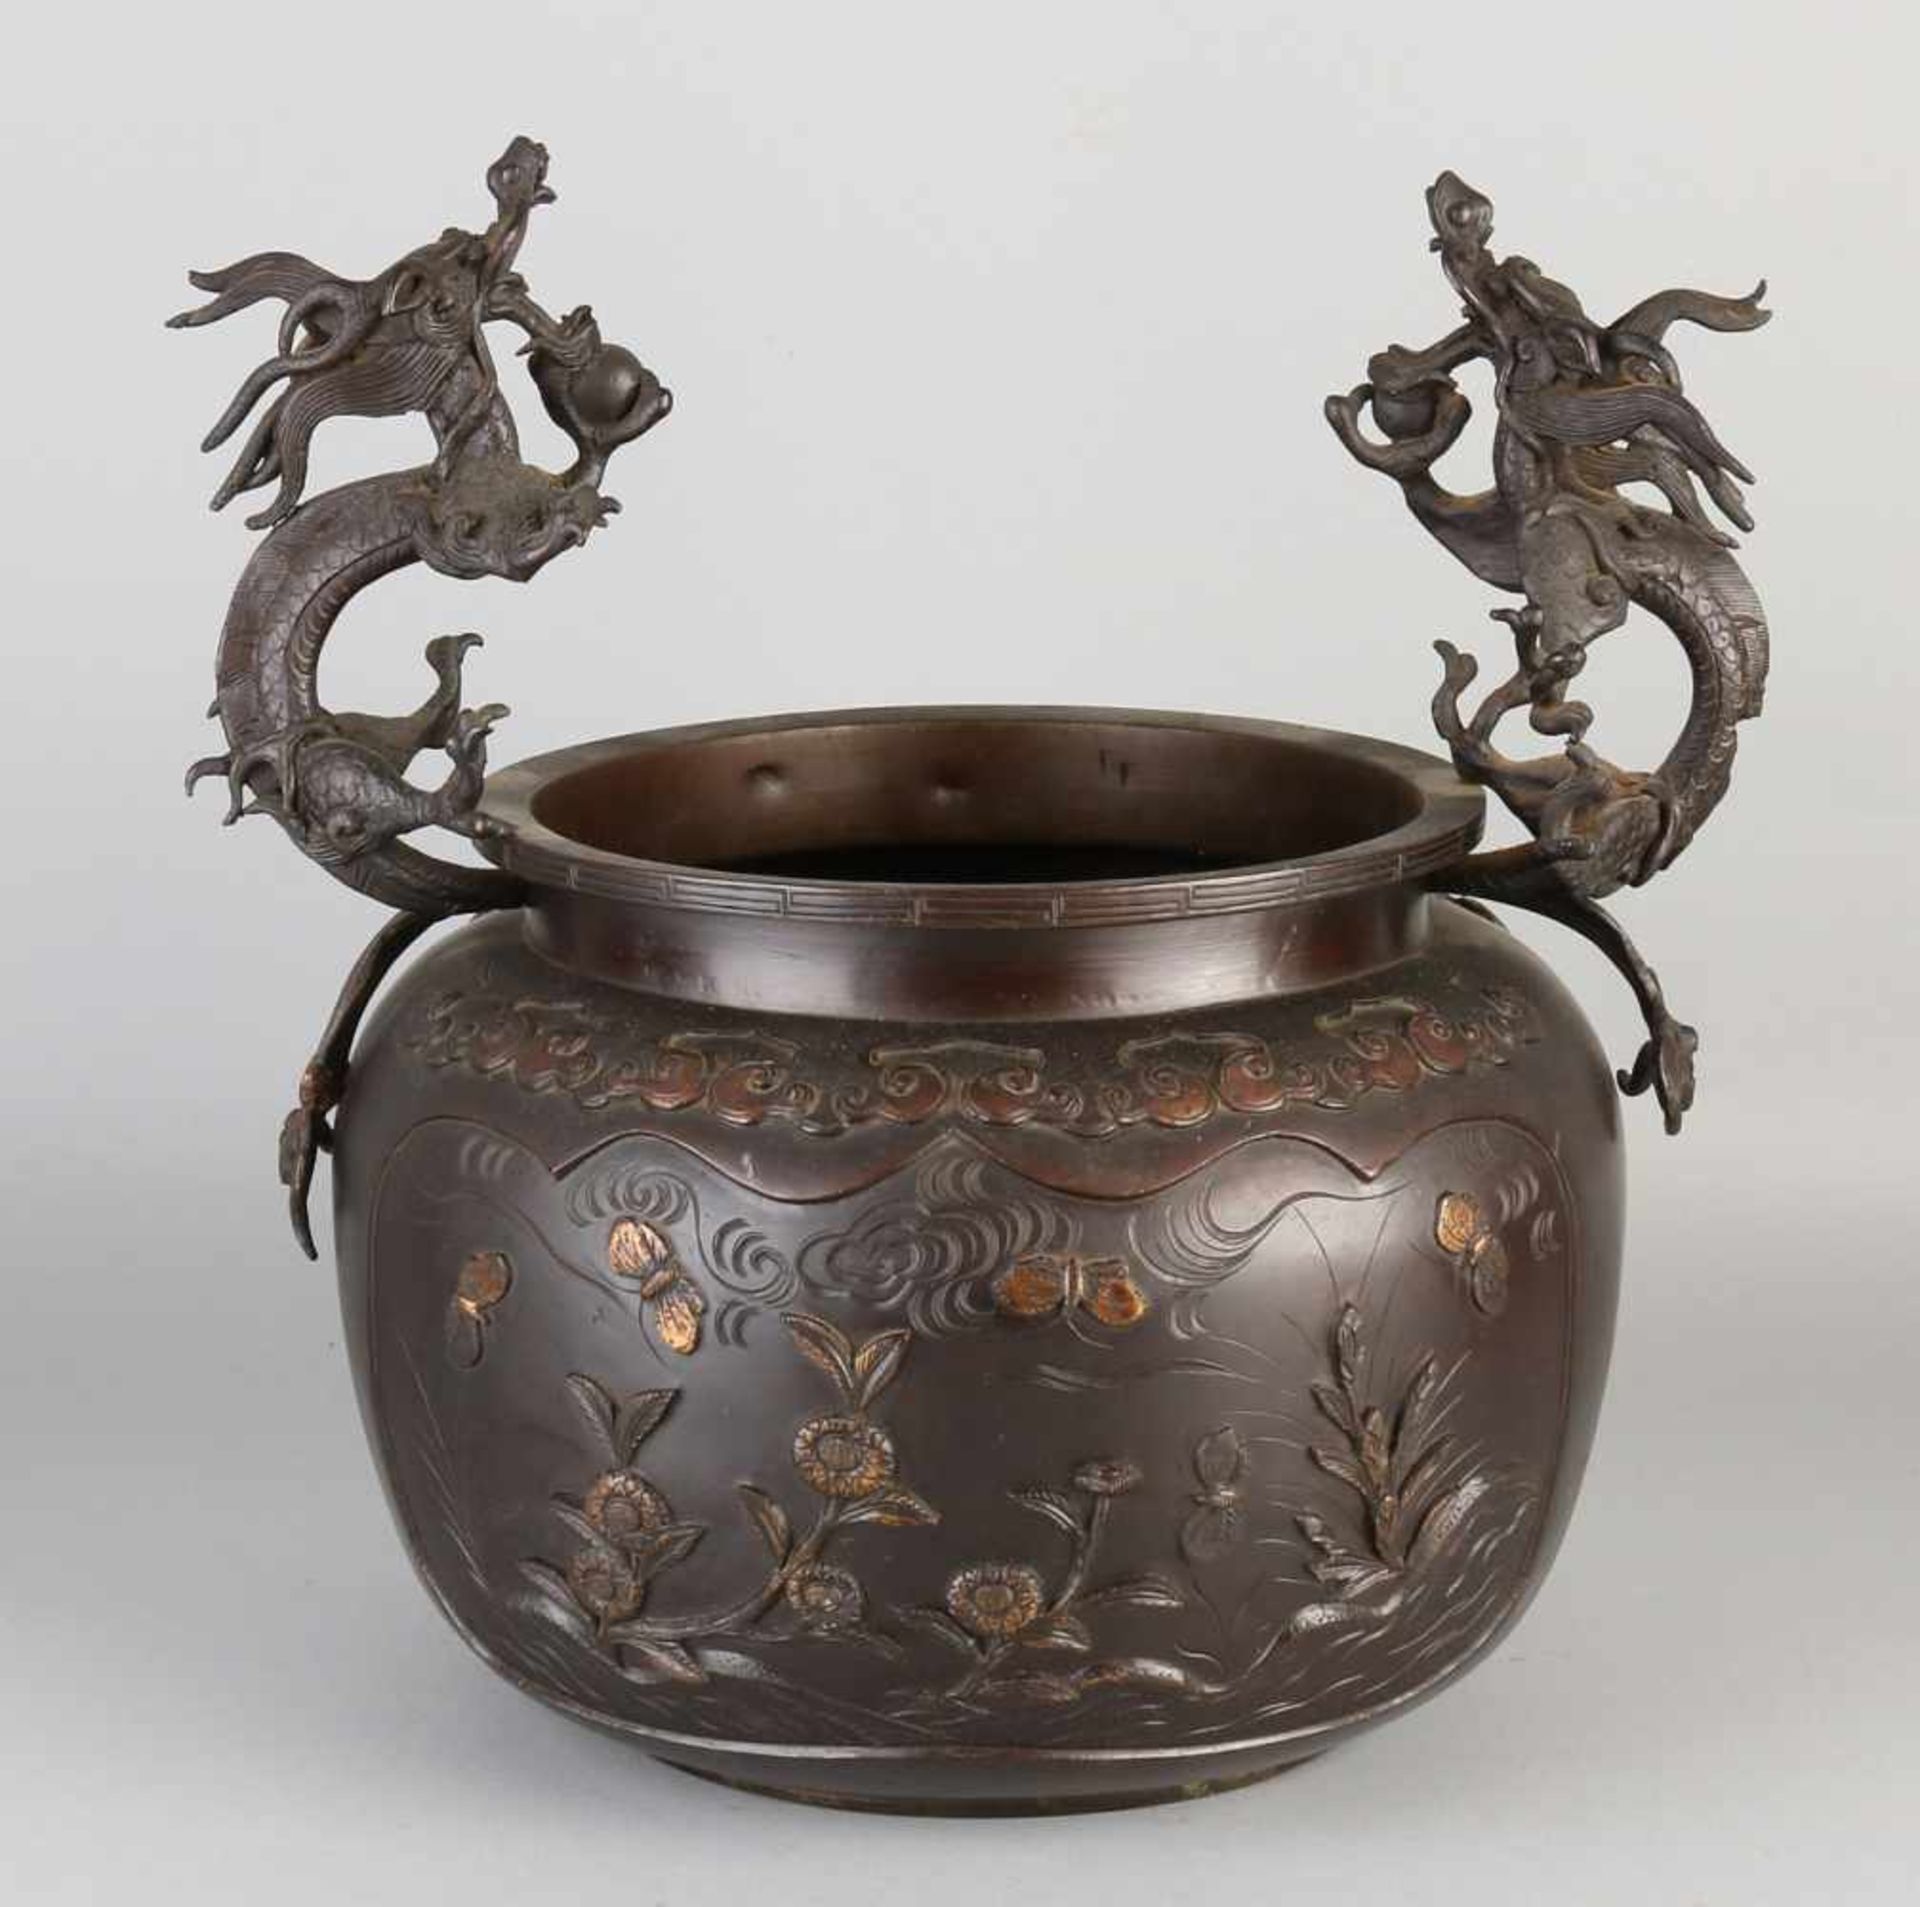 Large 19th century two-tone bronze flowerpot with dragons / birds and floral decor. Size: H Ø 38 x